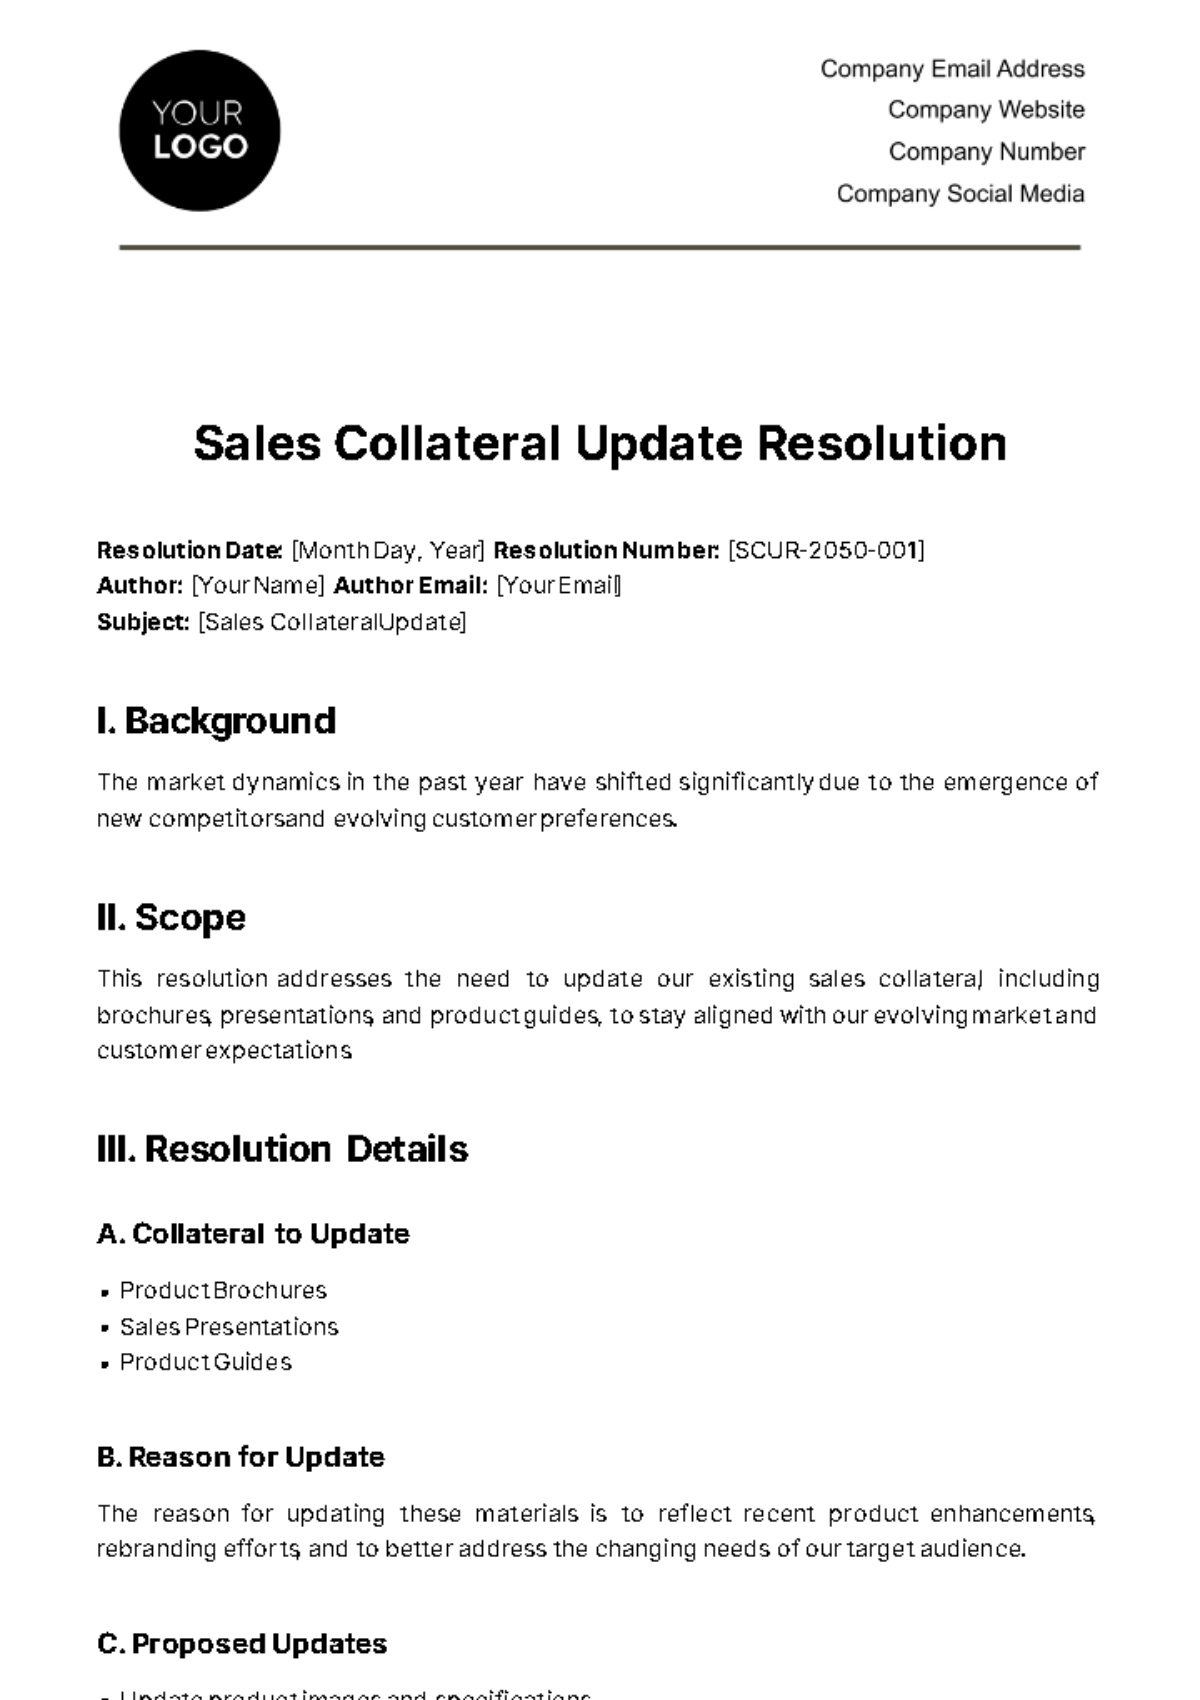 Sales Collateral Update Resolution Template